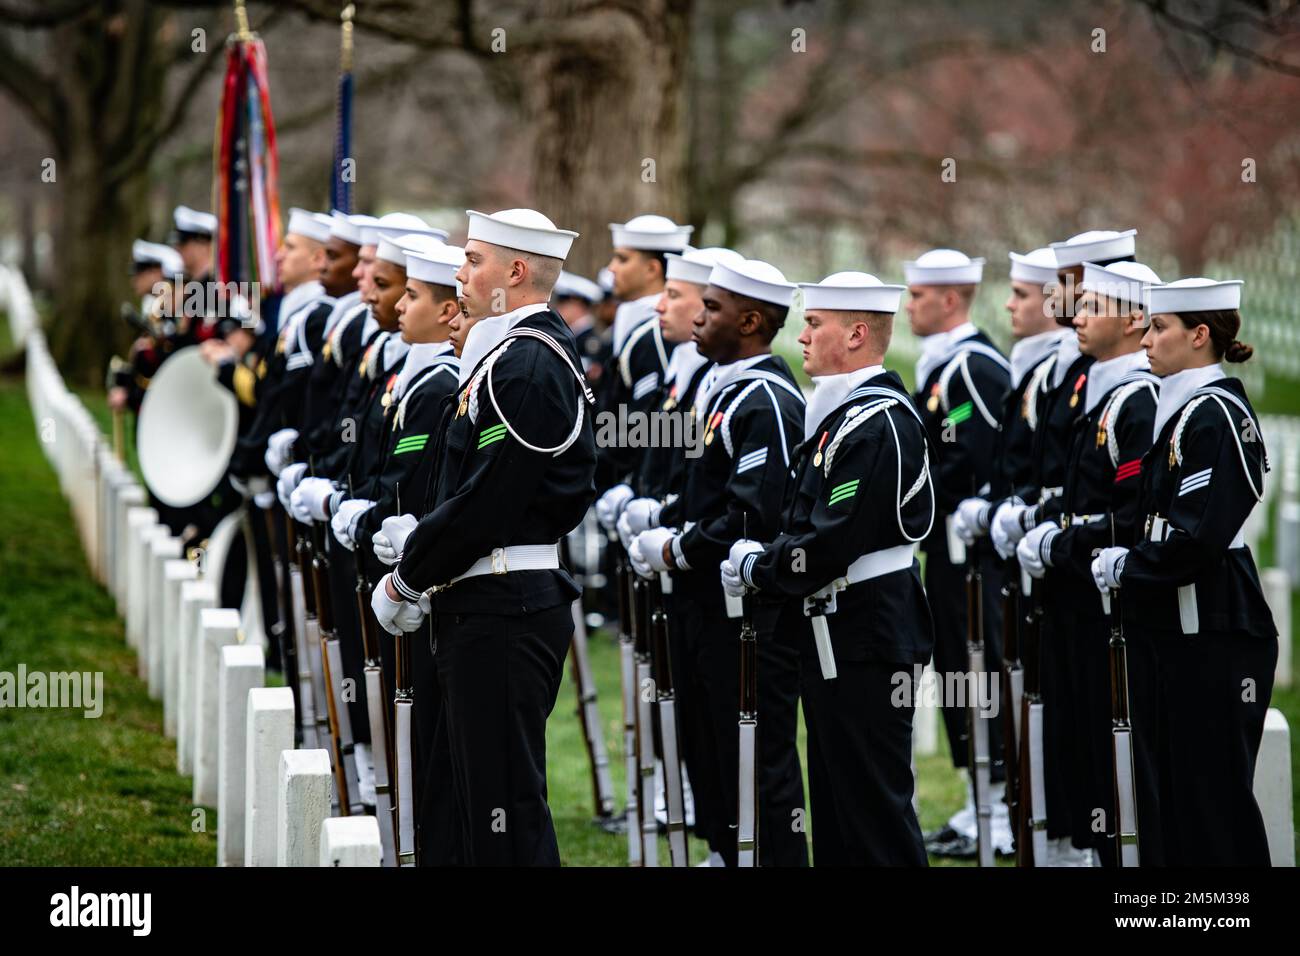 Sailors from the U.S. Navy Ceremonial Guard and the U.S. Navy Ceremonial Band support military funeral honors with funeral escort for U.S. Navy Seaman 1st Class Walter Stein in Section 36 of Arlington National Cemetery, Arlington, Va., March 24, 2022. Stein was killed during the attack on Pearl Harbor while serving aboard the USS Oklahoma.    From the Defense POW/MIA Accounting Agency (DPAA) press release:    On Dec. 7, 1941, Stein was assigned to the battleship USS Oklahoma, which was moored at Ford Island, Pearl Harbor, when the ship was attacked by Japanese aircraft. The USS Oklahoma sustai Stock Photo